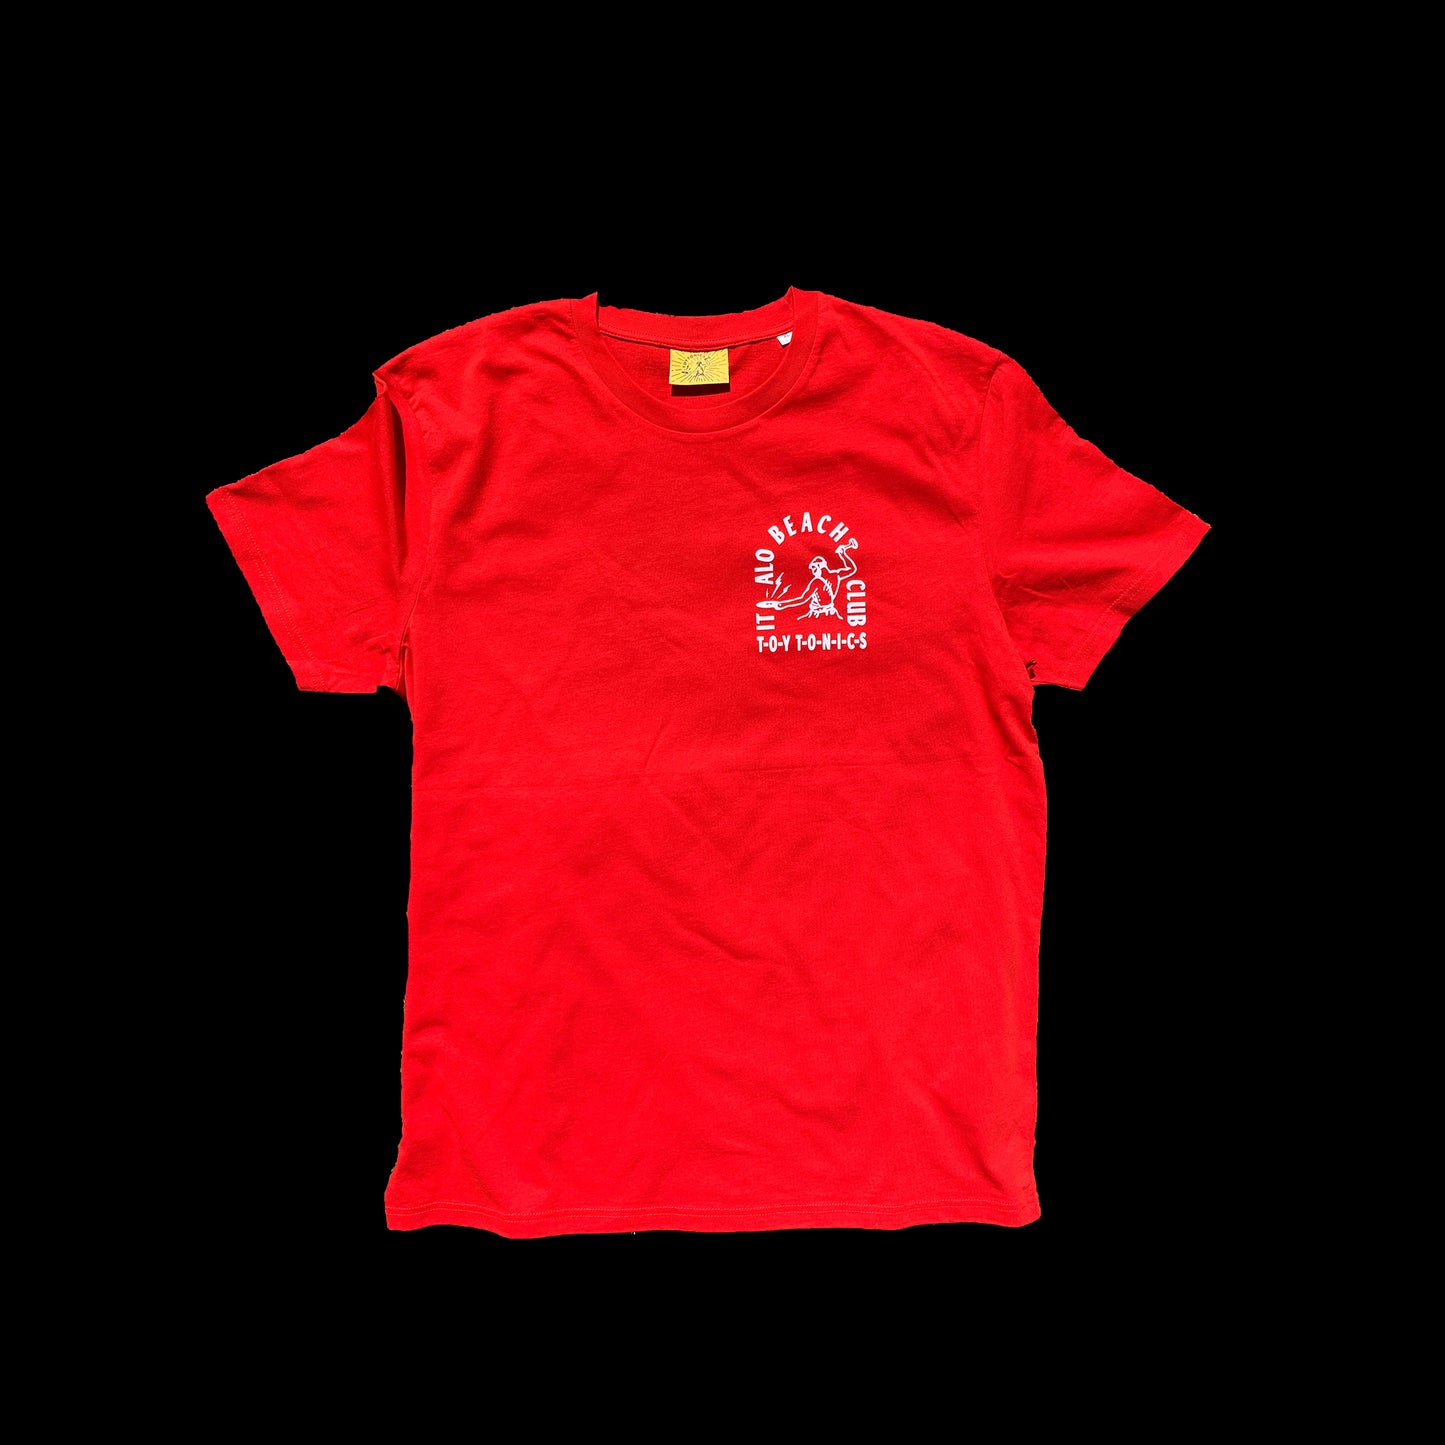 Discoteca T-Shirt - red - Limited to 150